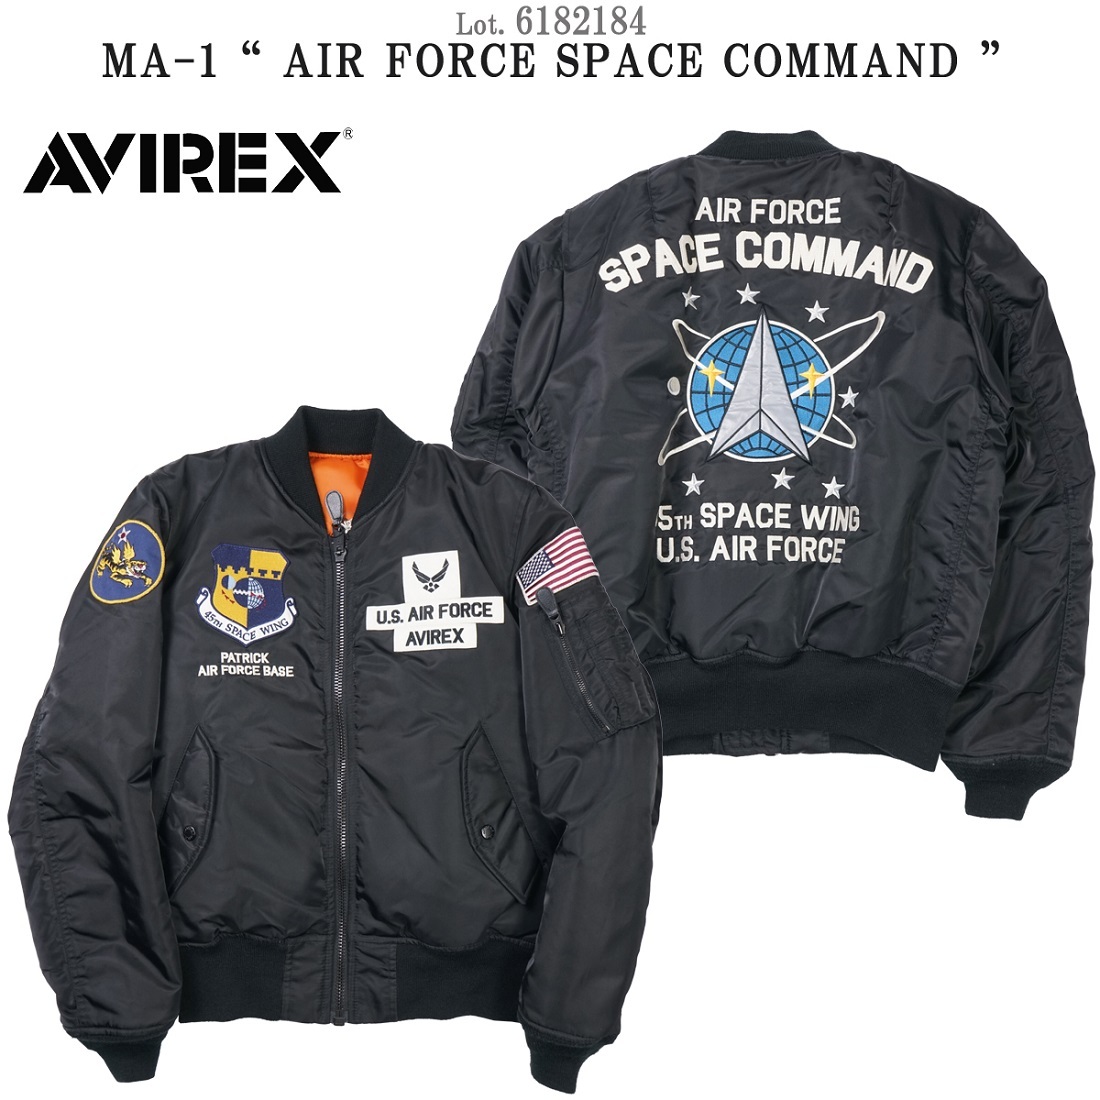 AVIREX MA-1 SPACE COMMAND-